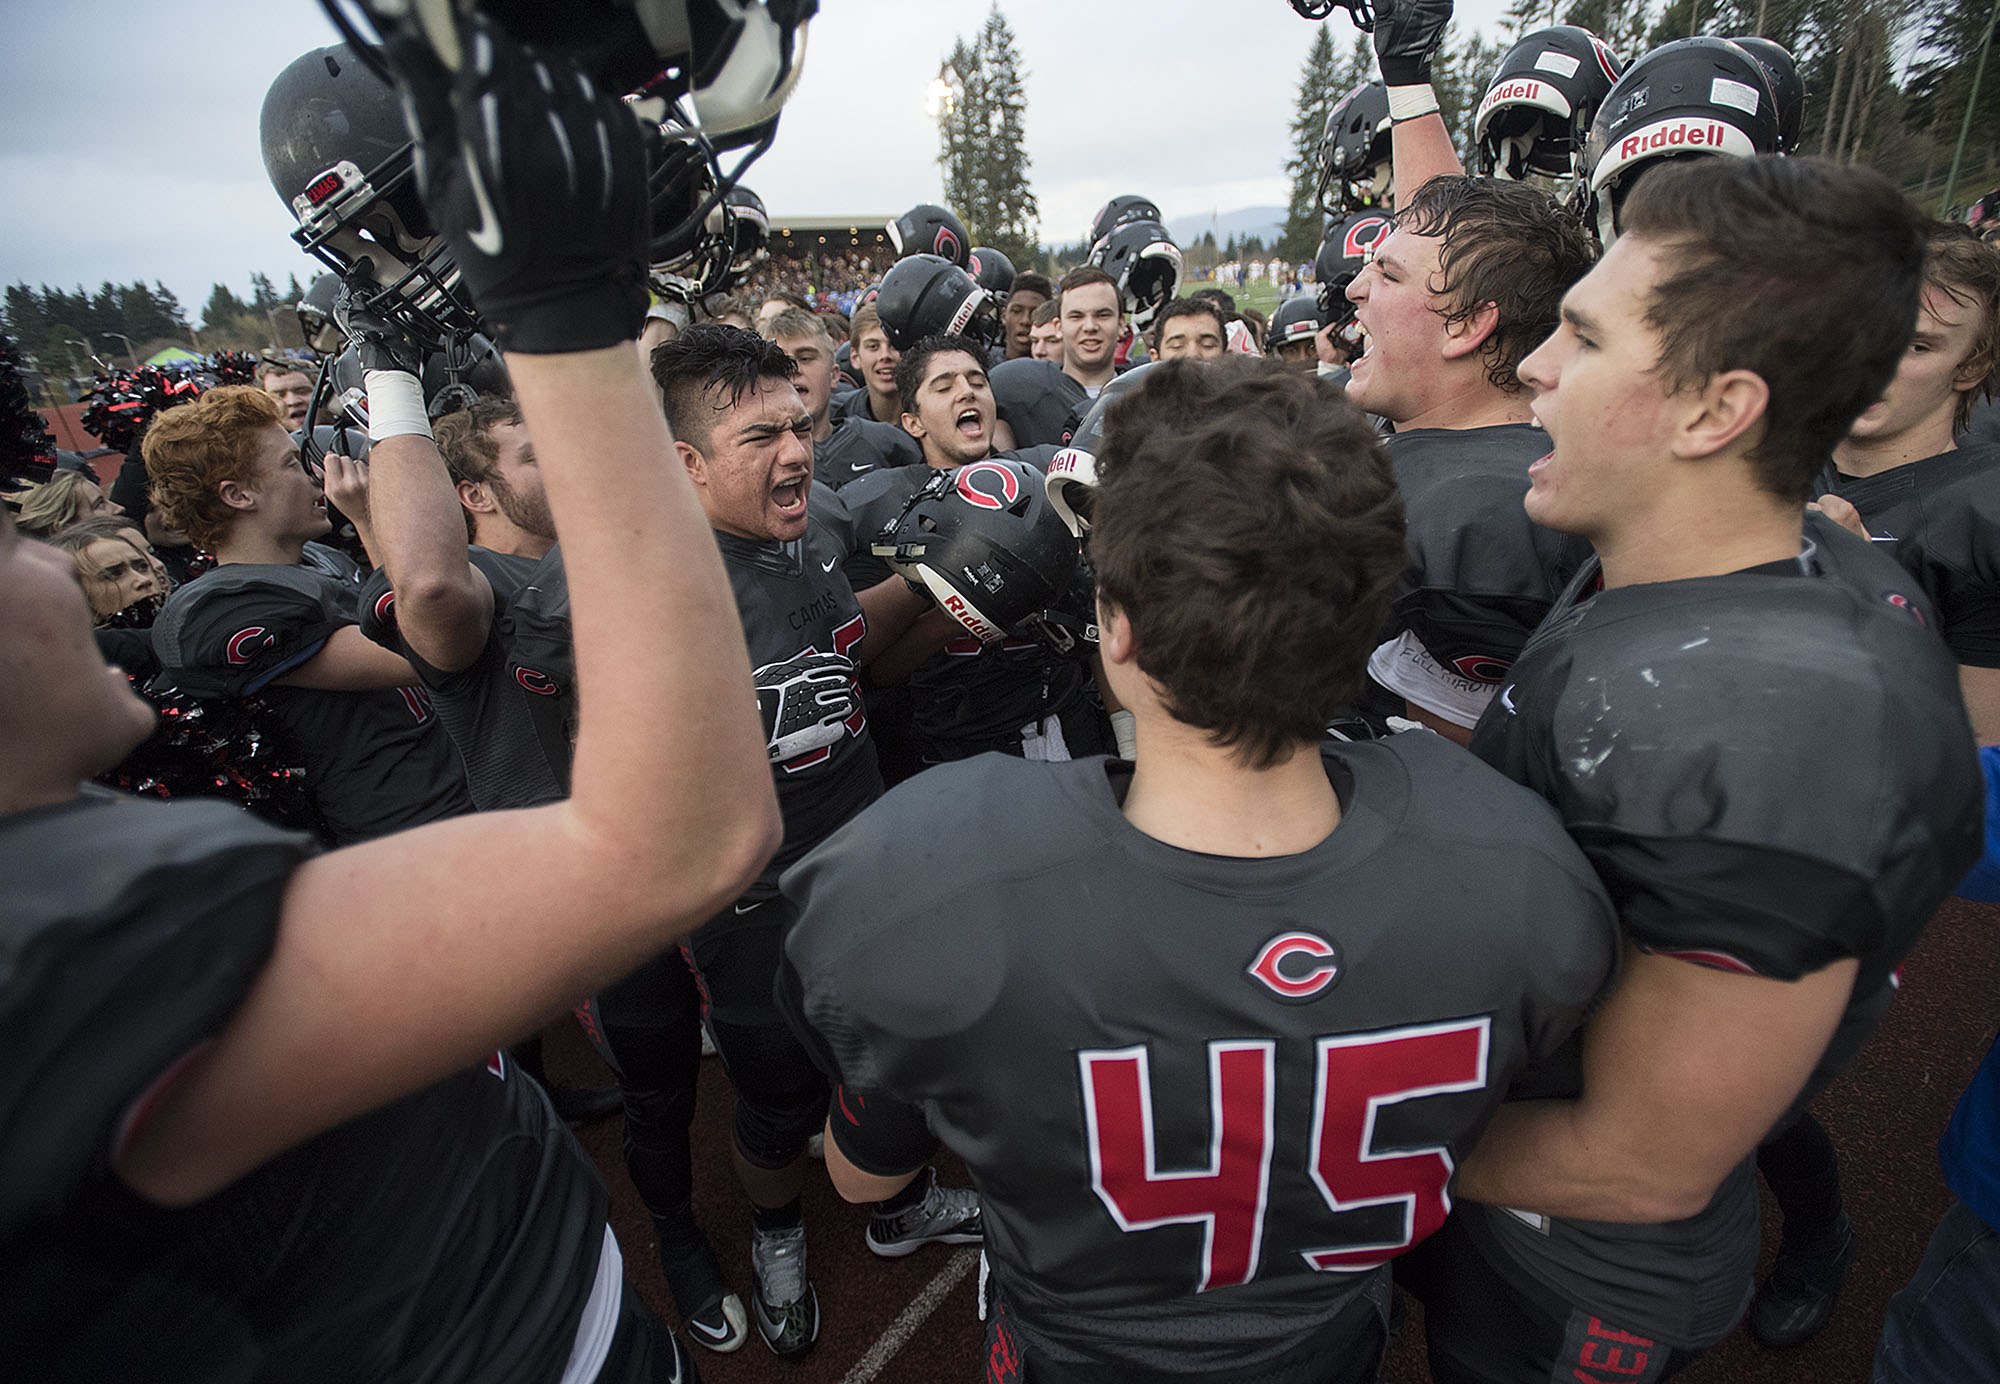 Camas players celebrate their playoff win over Sumner at McKenzie Stadium on Saturday afternoon, Nov. 26, 2016.